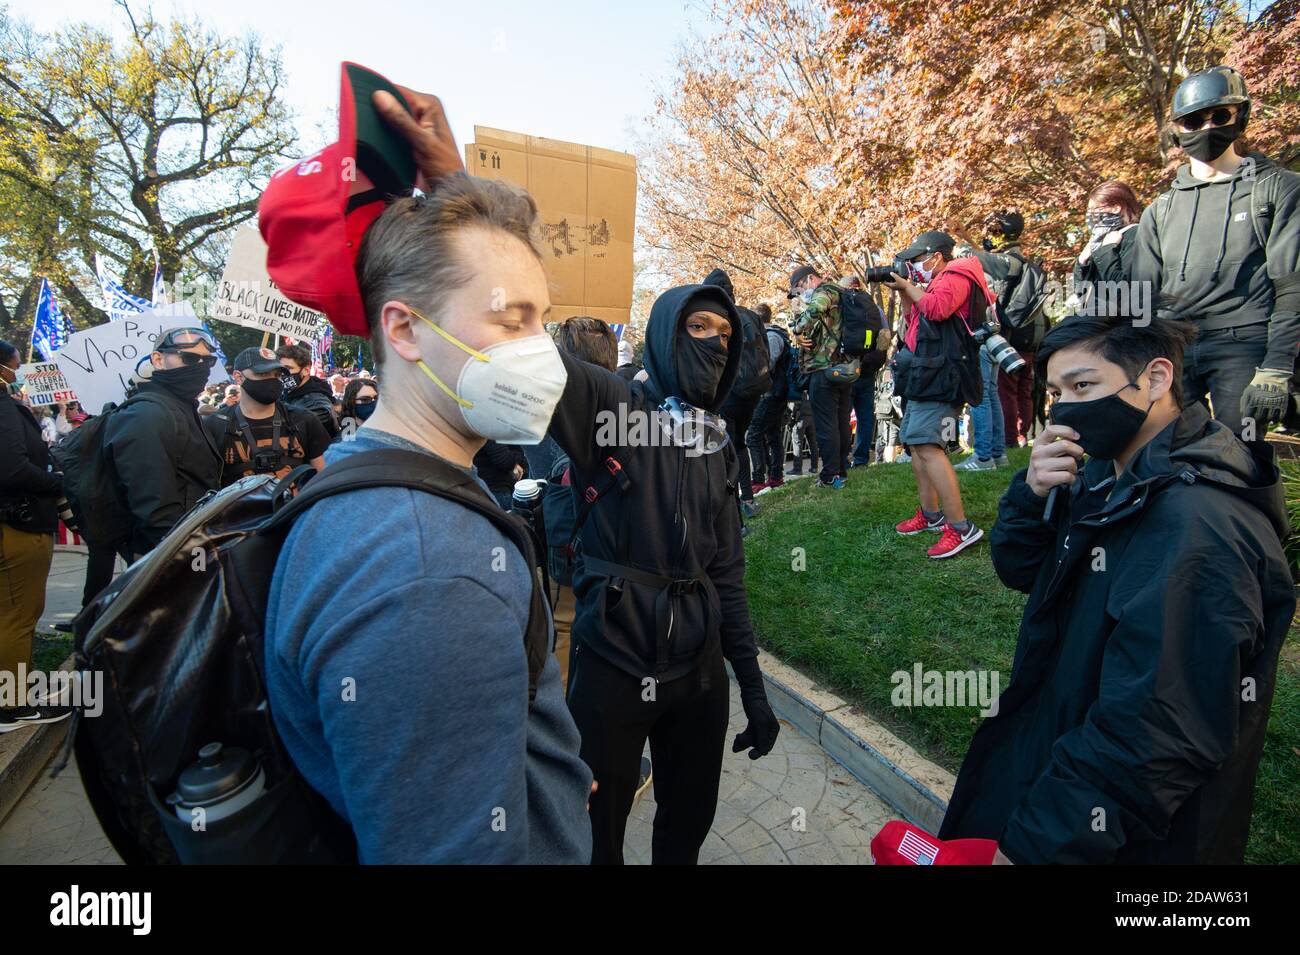 Washington DC, USA. 14th November, 2020. MAGA hat taken from President Trump supporters by Antifa in Washington DC at the Million Maga March to 'Stop the Steal' on November 14th, 2020. Credit: Albert Halim/Alamy Live News Stock Photo